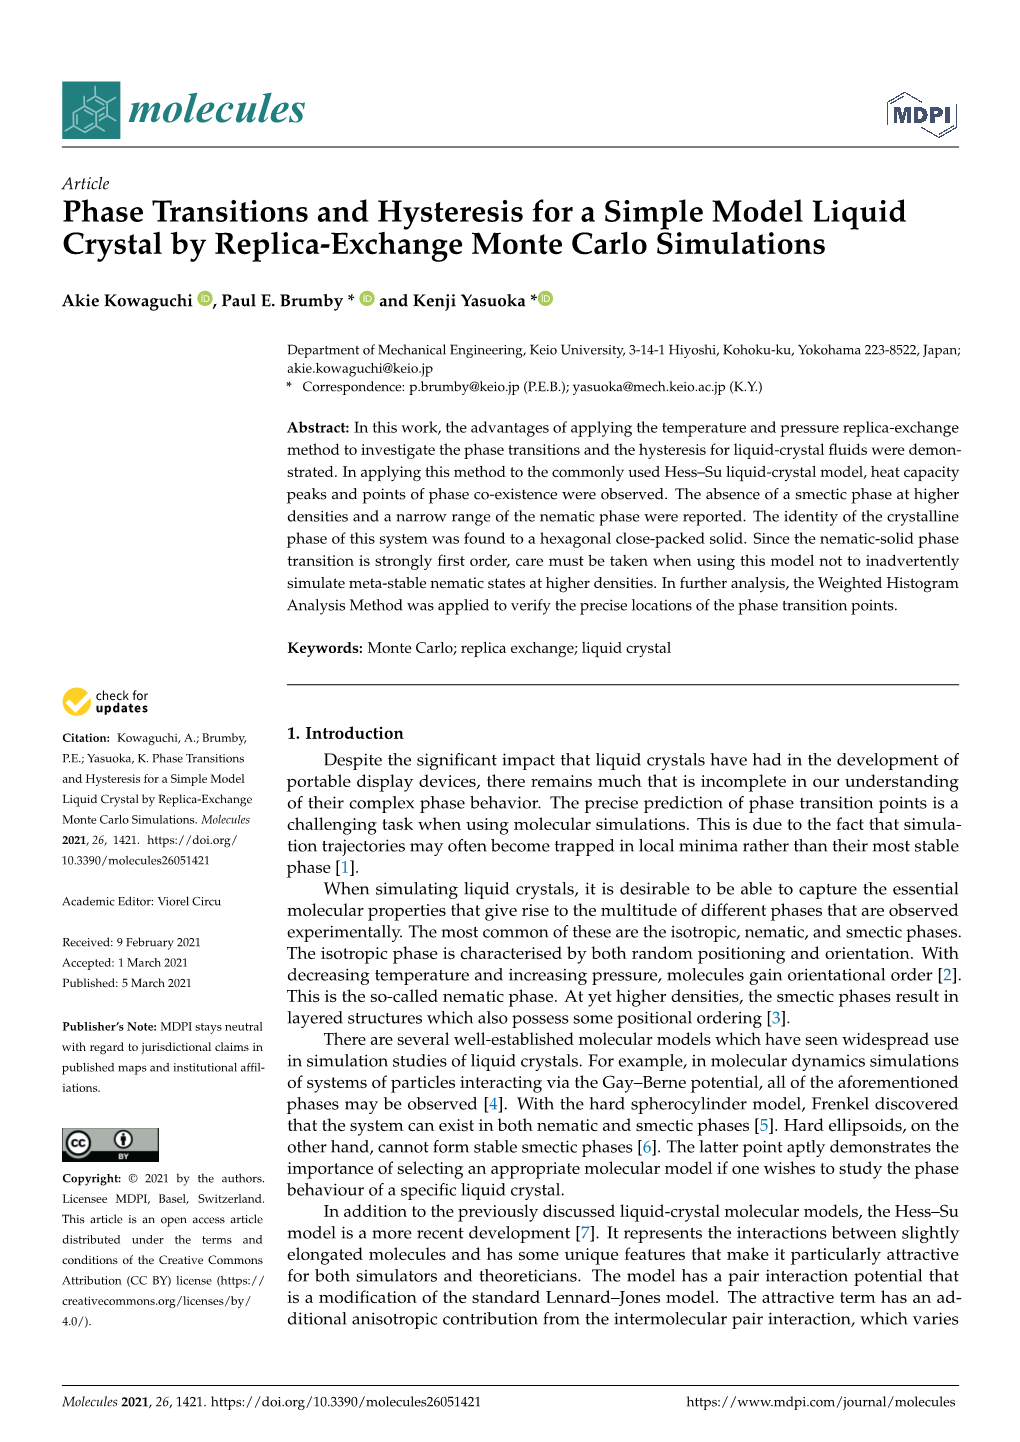 Phase Transitions and Hysteresis for a Simple Model Liquid Crystal by Replica-Exchange Monte Carlo Simulations